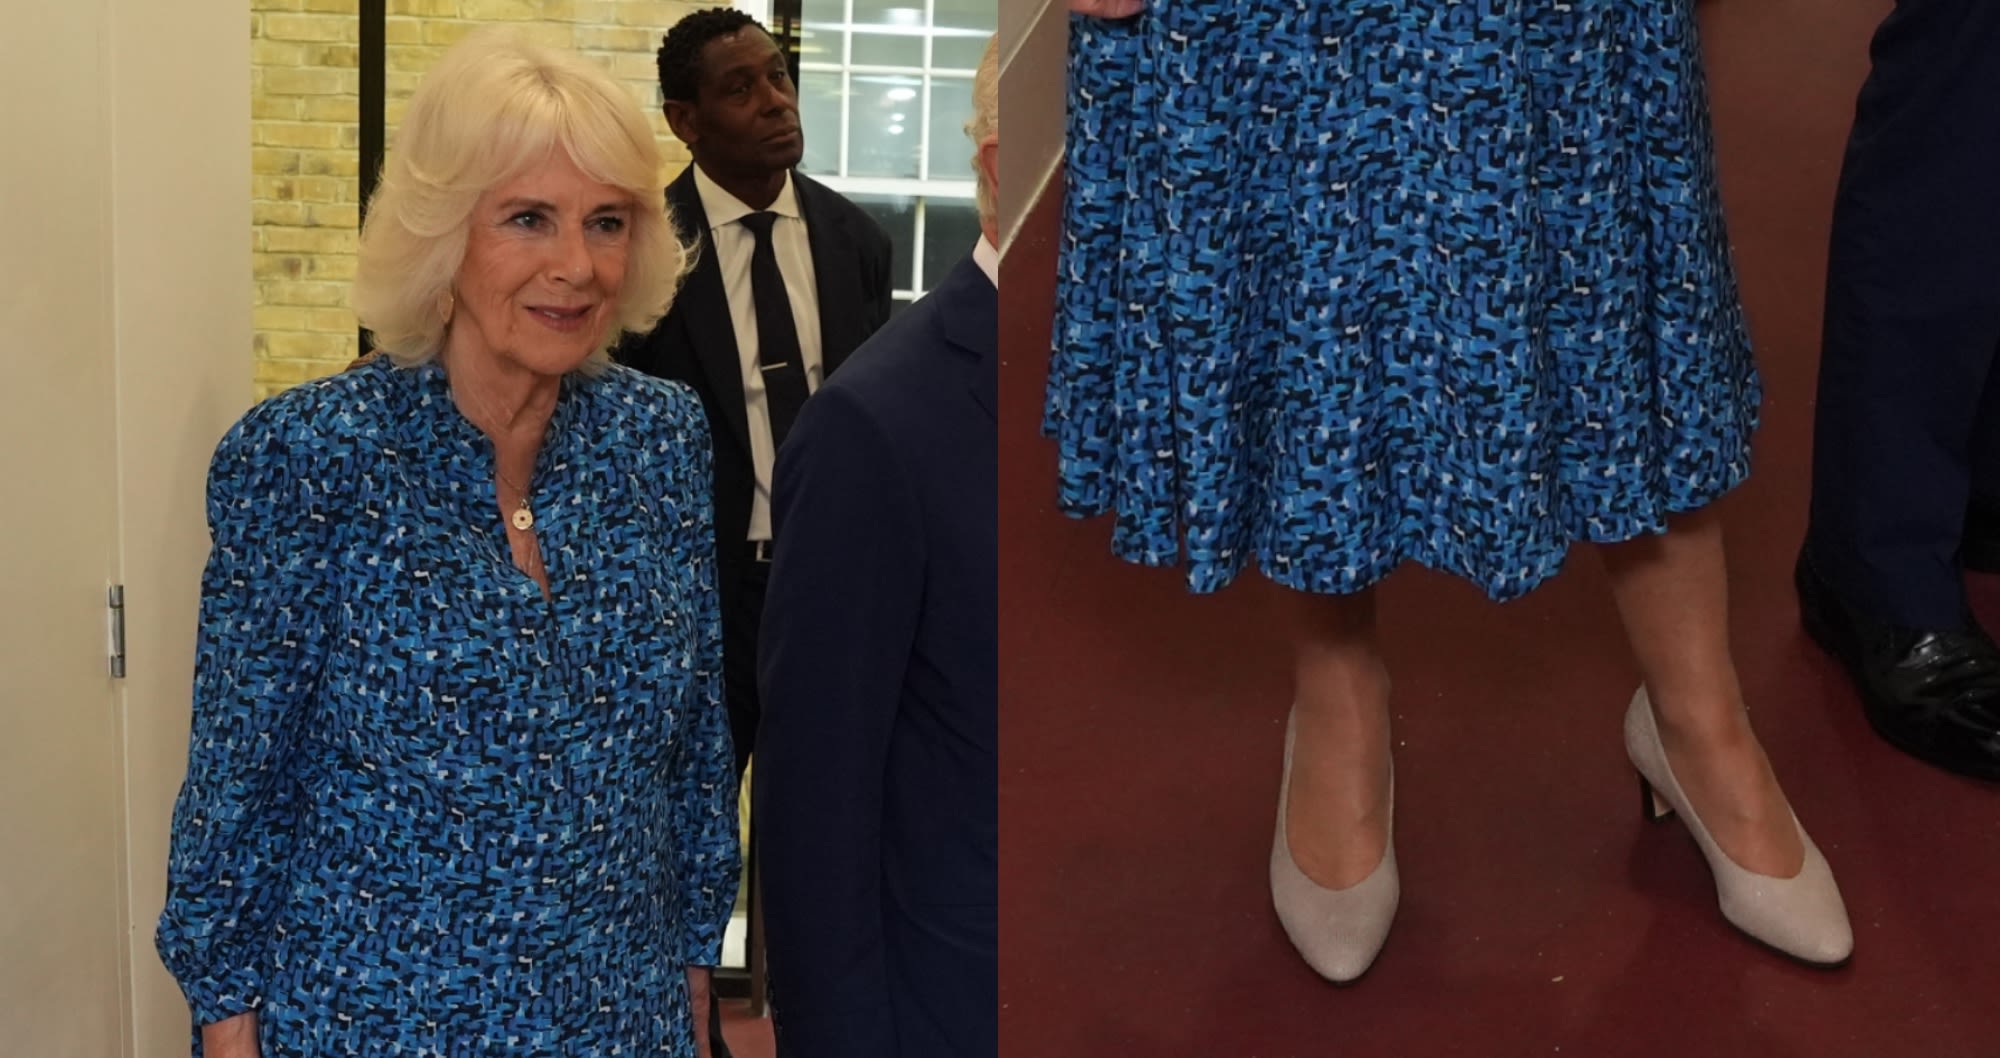 Queen Camilla Shines in Kitten Heels and Printed Dress at RADA Appearance in London